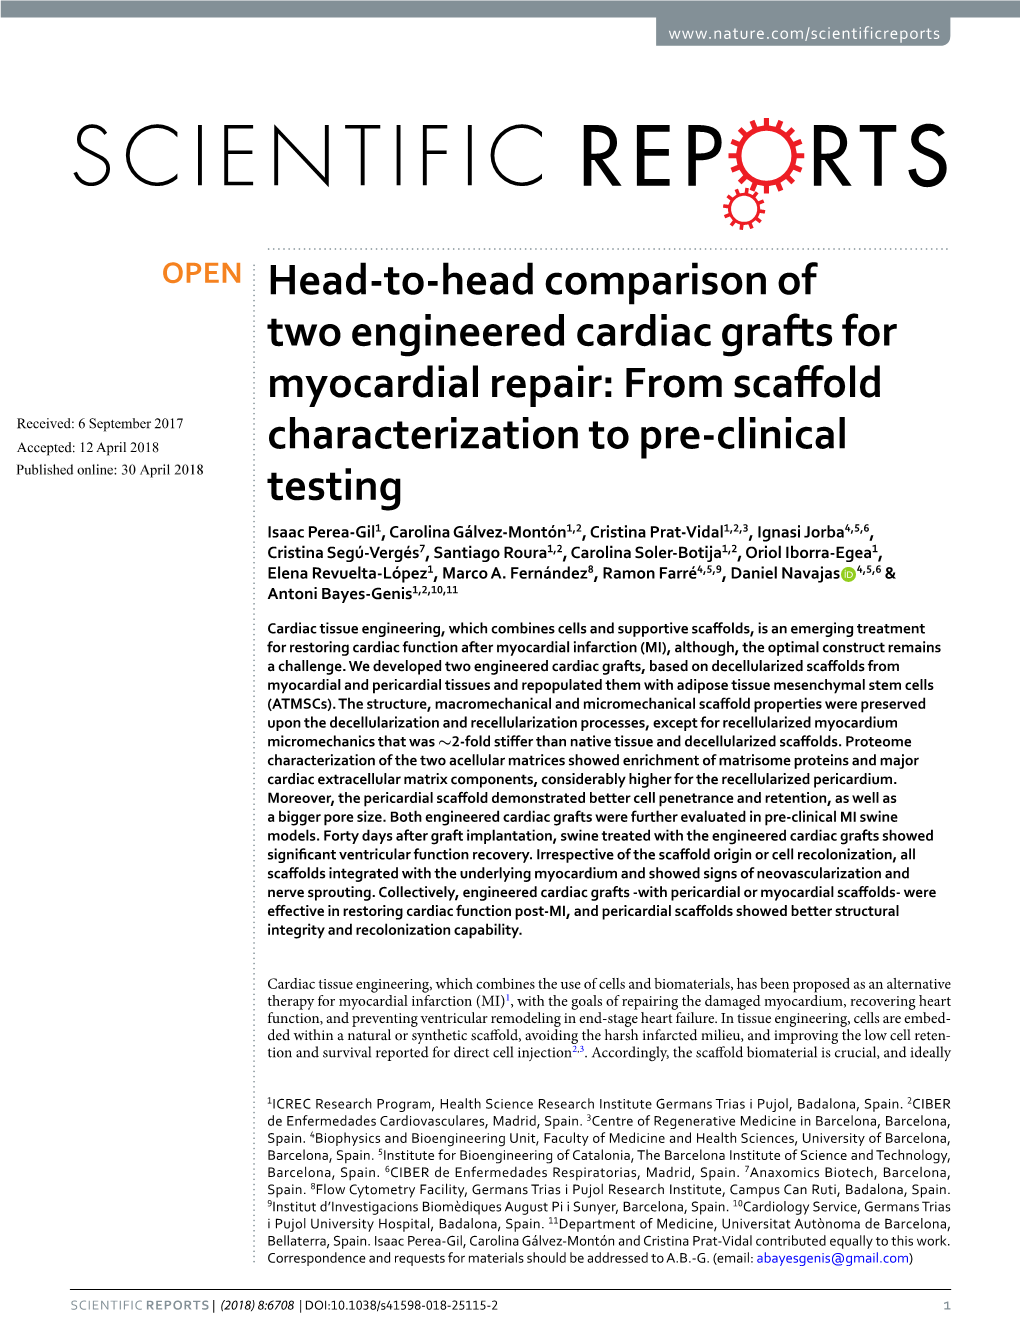 Head-To-Head Comparison of Two Engineered Cardiac Grafts